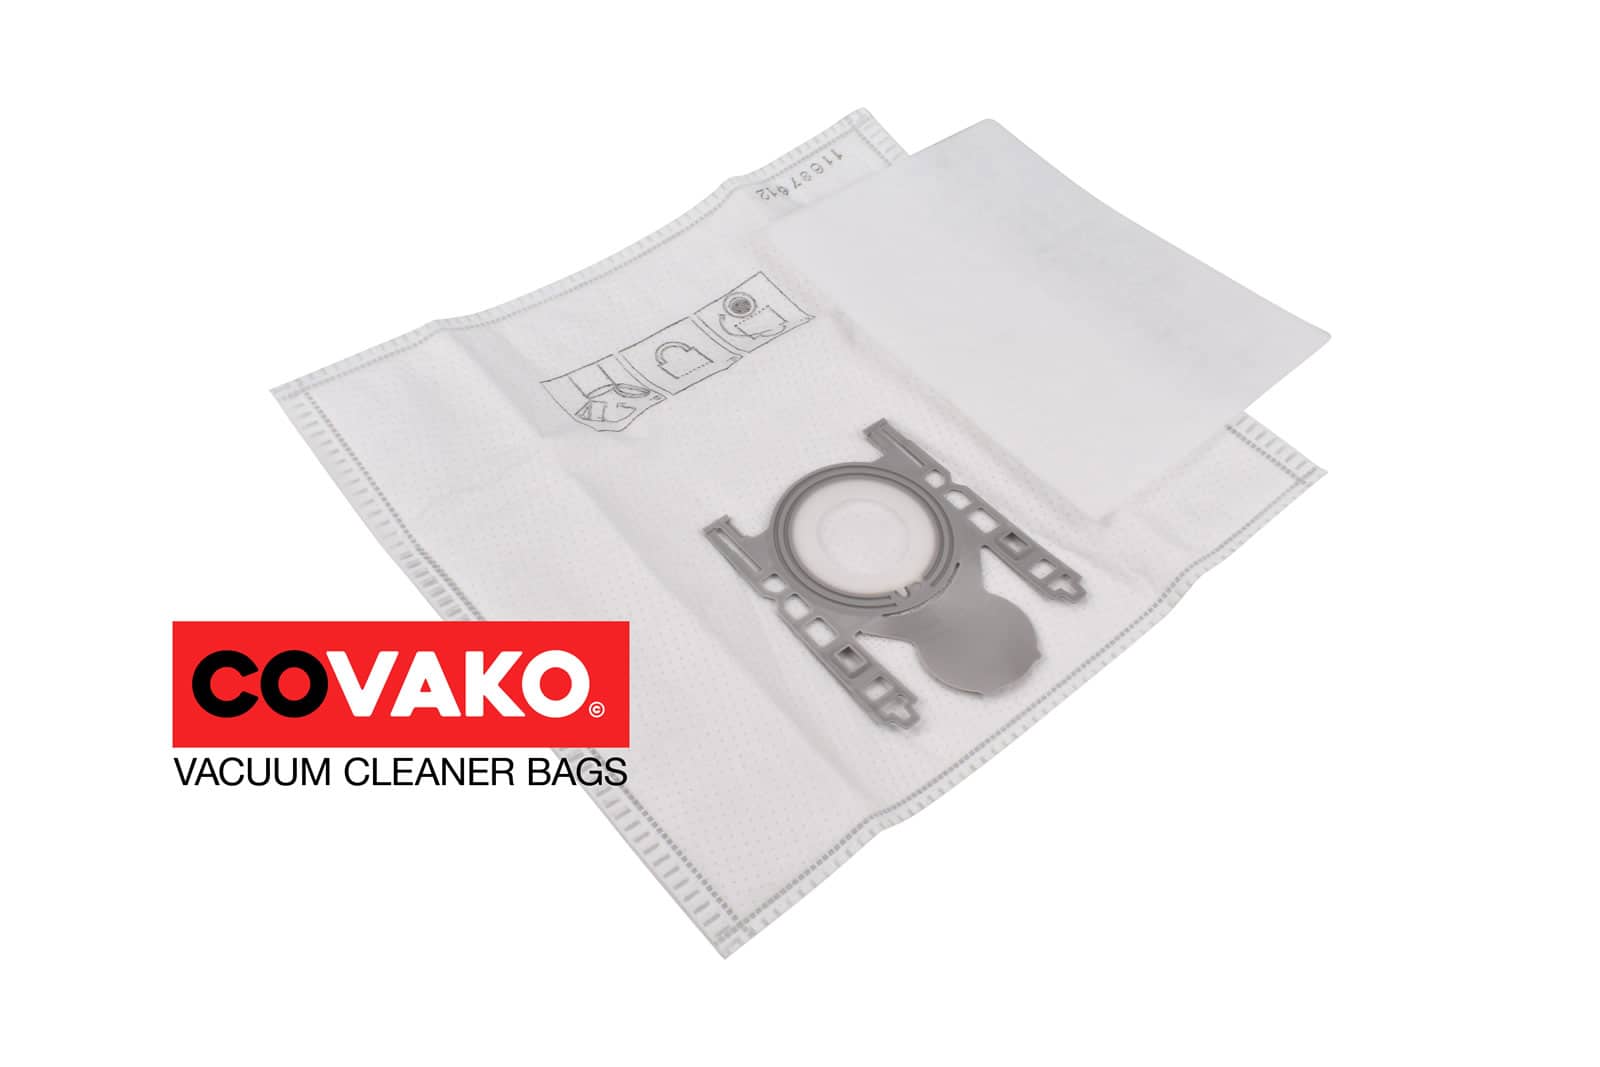 Bosch BBS 6000-6309 / Synthesis - Bosch vacuum cleaner bags